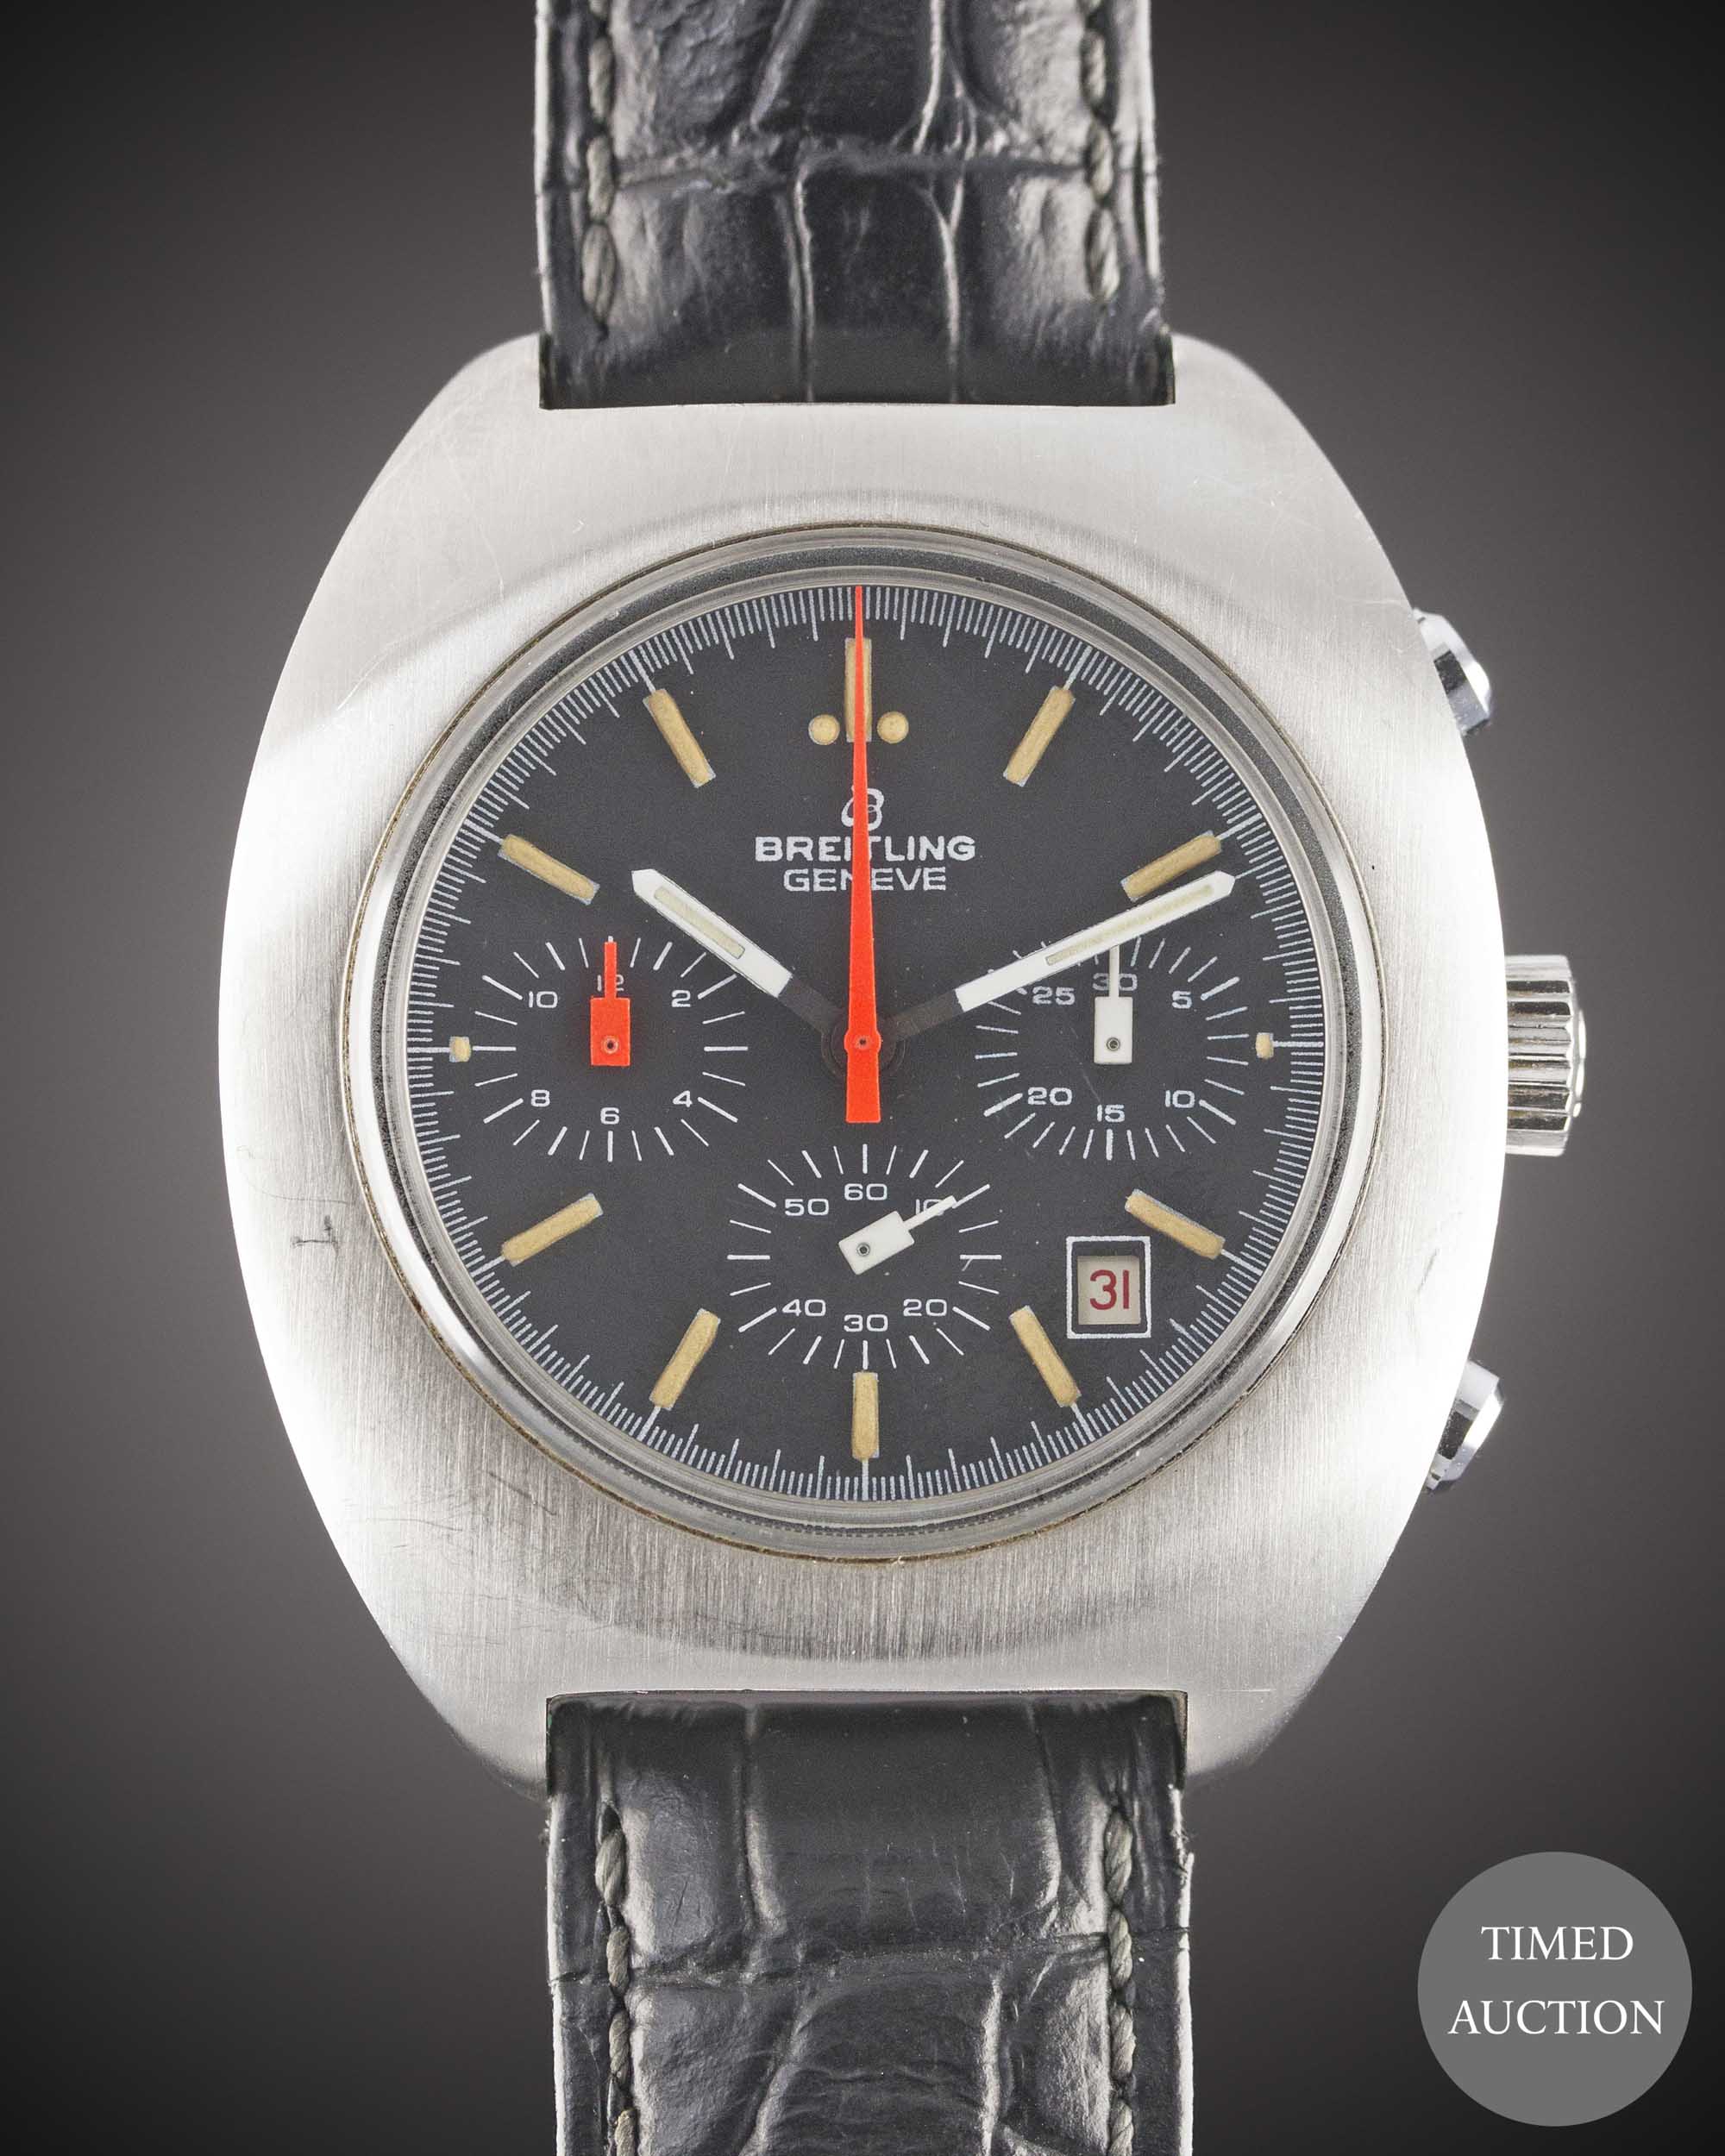 A GENTLEMAN'S STAINLESS STEEL BREITLING GENEVE "LONG PLAYING" CHRONOGRAPH WRIST WATCH CIRCA 1973,